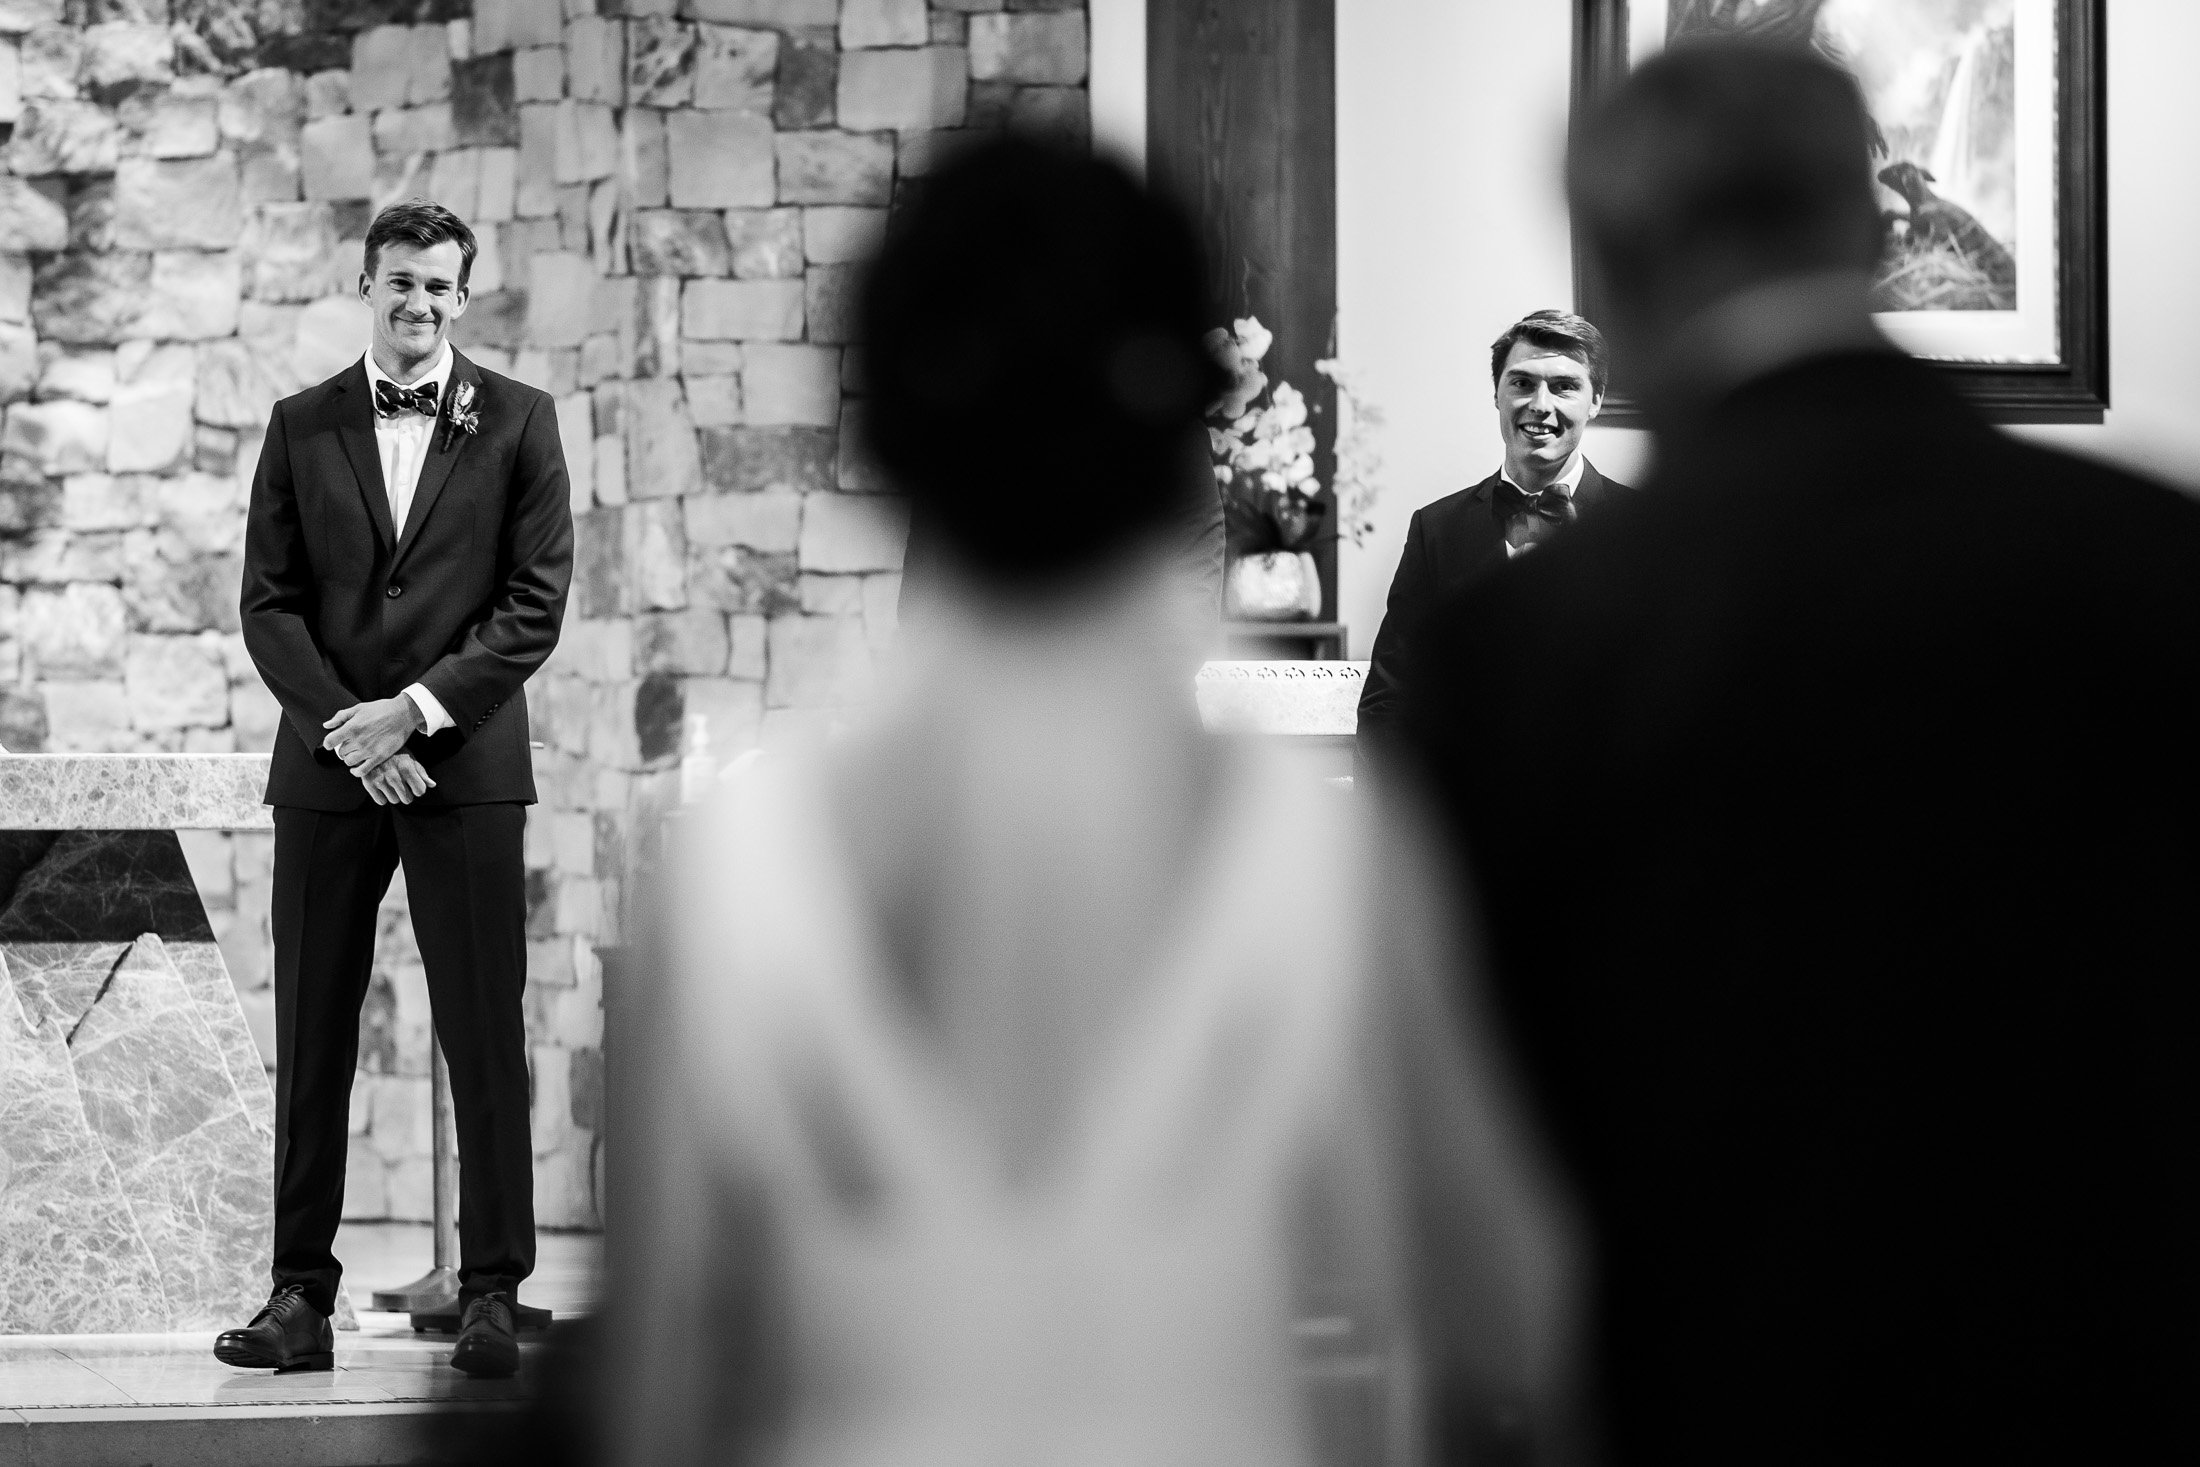 Groom reacts with a smile as the bride walks down the aisle during the processional during their wedding ceremony at the church, wedding, wedding photos, wedding photography, wedding photographer, wedding inspiration, wedding photo inspiration, wedding portraits, wedding ceremony, wedding reception, mountain wedding, Catholic Church wedding, Catholic Church wedding photos, Catholic Church wedding photography, Catholic Church wedding photographer, Catholic Church wedding inspiration, Catholic Church wedding venue, Steamboat Springs wedding, Steamboat Springs wedding photos, Steamboat Springs wedding photography, Steamboat Springs wedding photographer, Colorado wedding, Colorado wedding photos, Colorado wedding photography, Colorado wedding photographer, Colorado mountain wedding, Colorado wedding inspiration